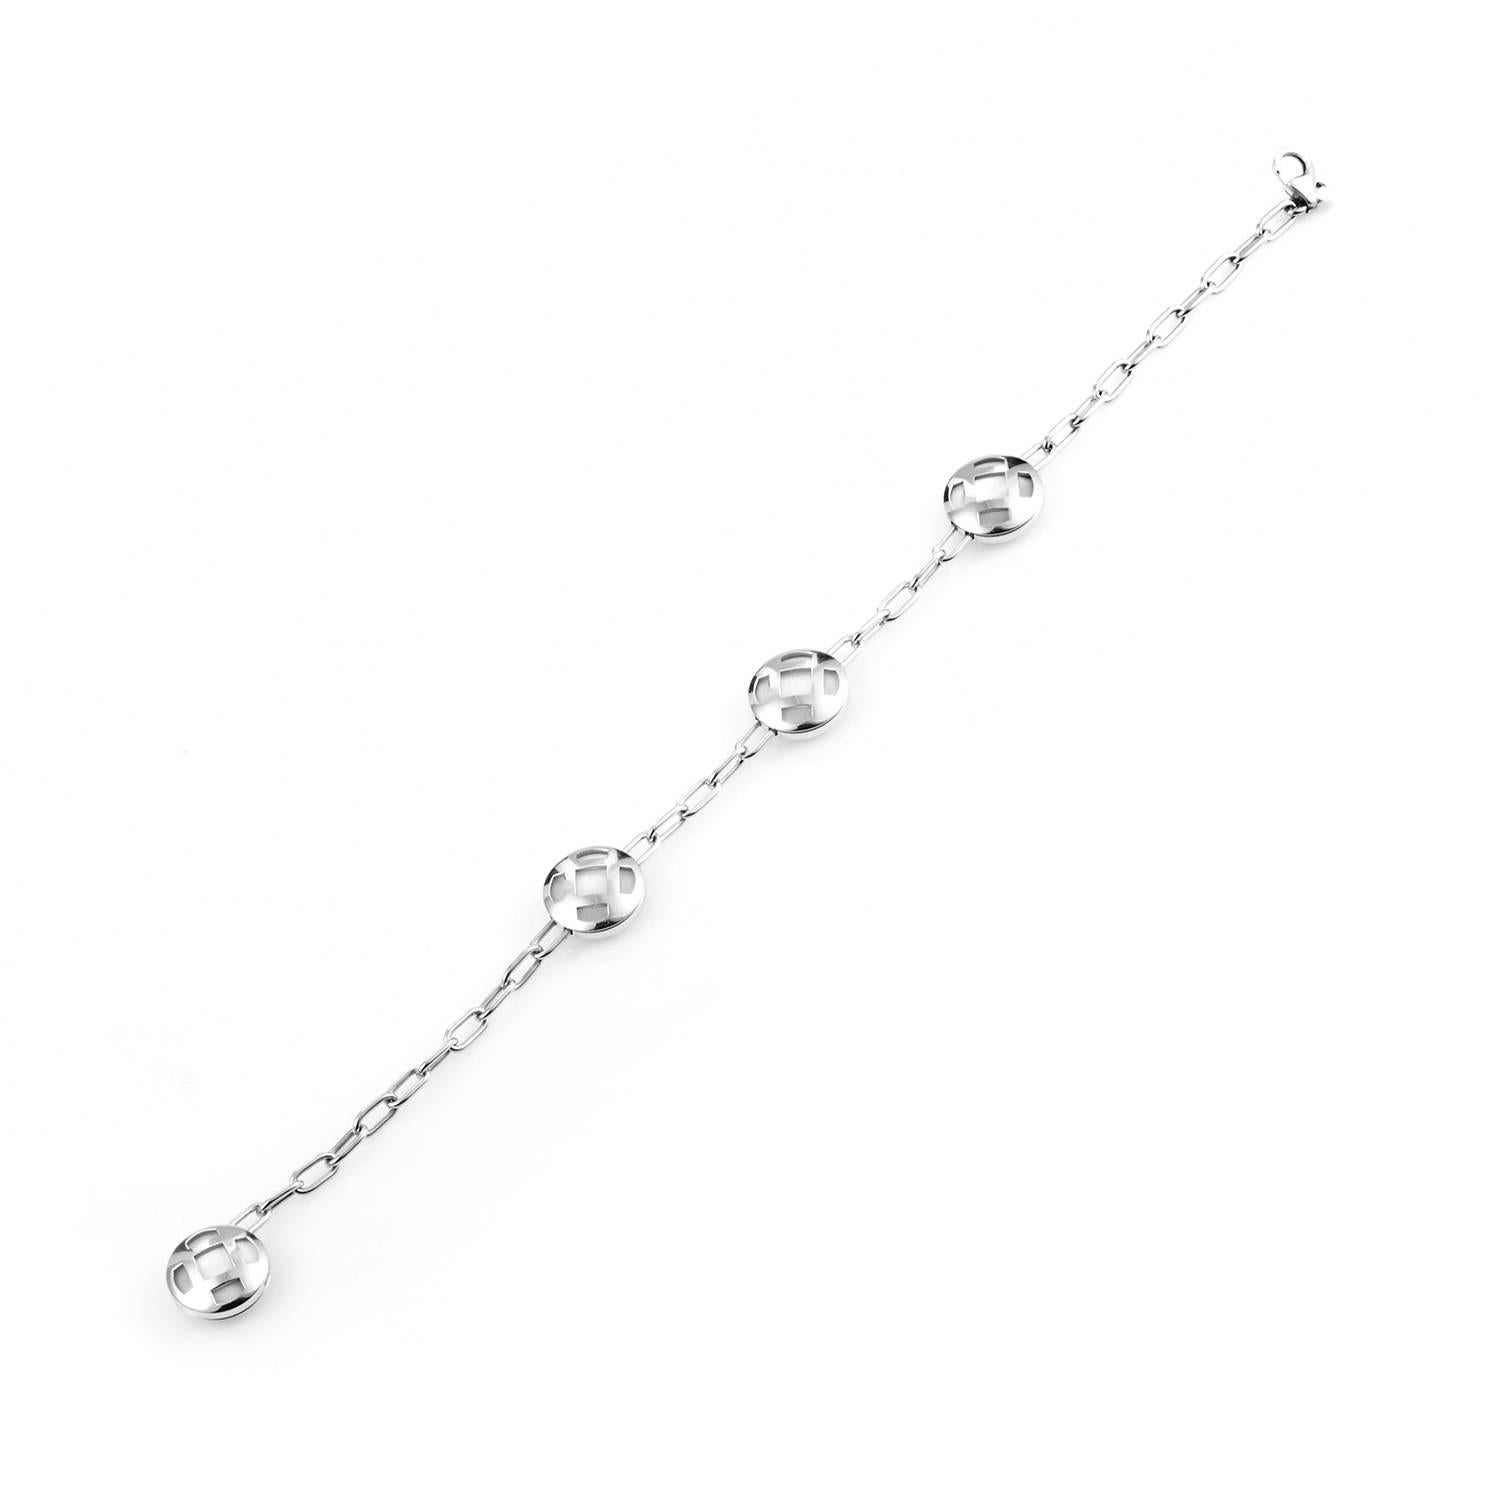 18K white gold is shaped into delicate links. The chain's flow periodically fans out into circular criss-cross housings, four in total, that frame the immaculate glow of mother of pearl. This is a loose bracelet that conforms readily to the wearer's